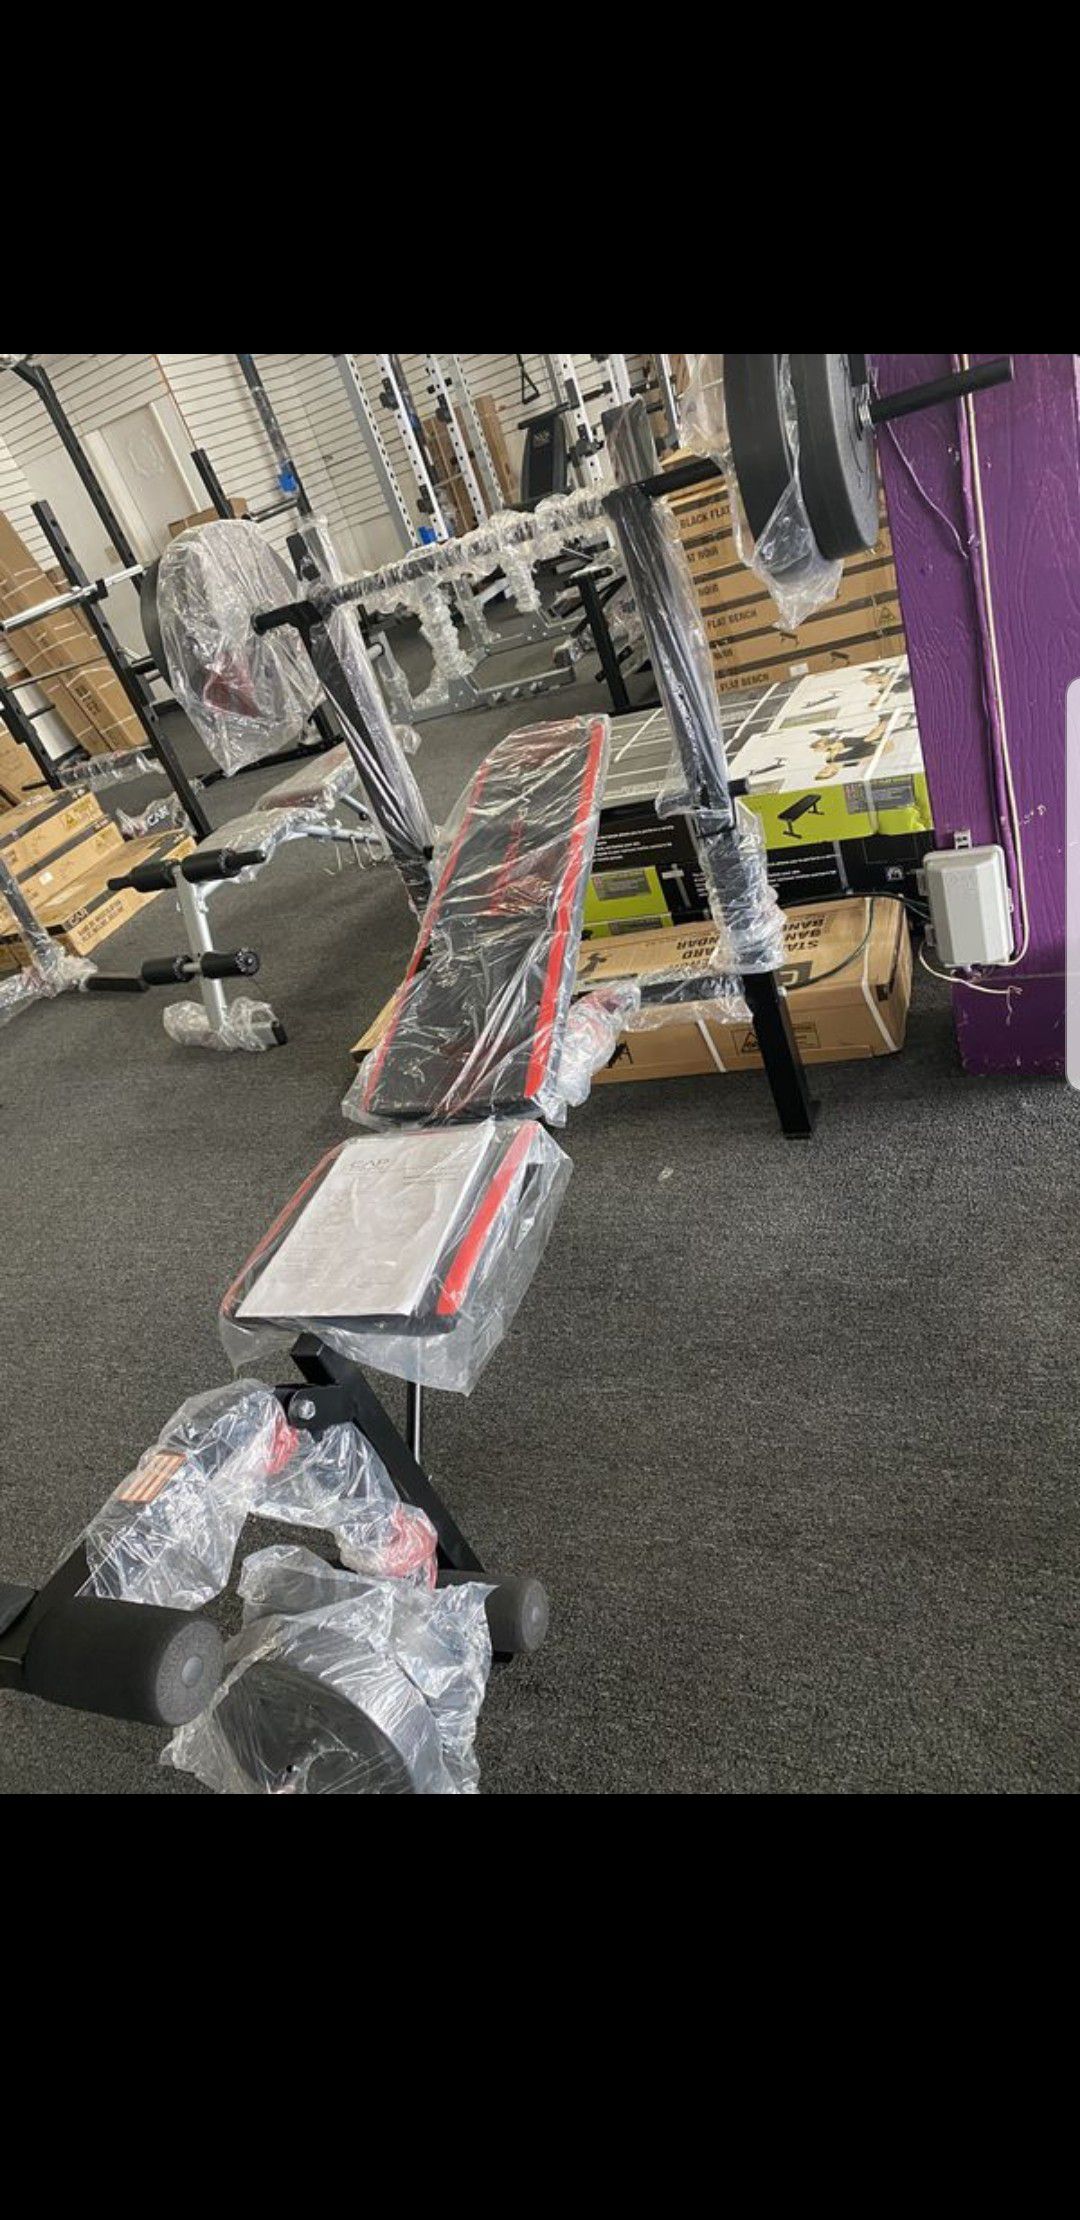 New Weight Bench with legs / extensions and barbell with 100 lbs of WEIGHT 🏋️‍♂️🏋️‍♀️ Comes with 100LBS OF WEIGHT (2) 25LBS (2) 15lbs (2) 10 lbs